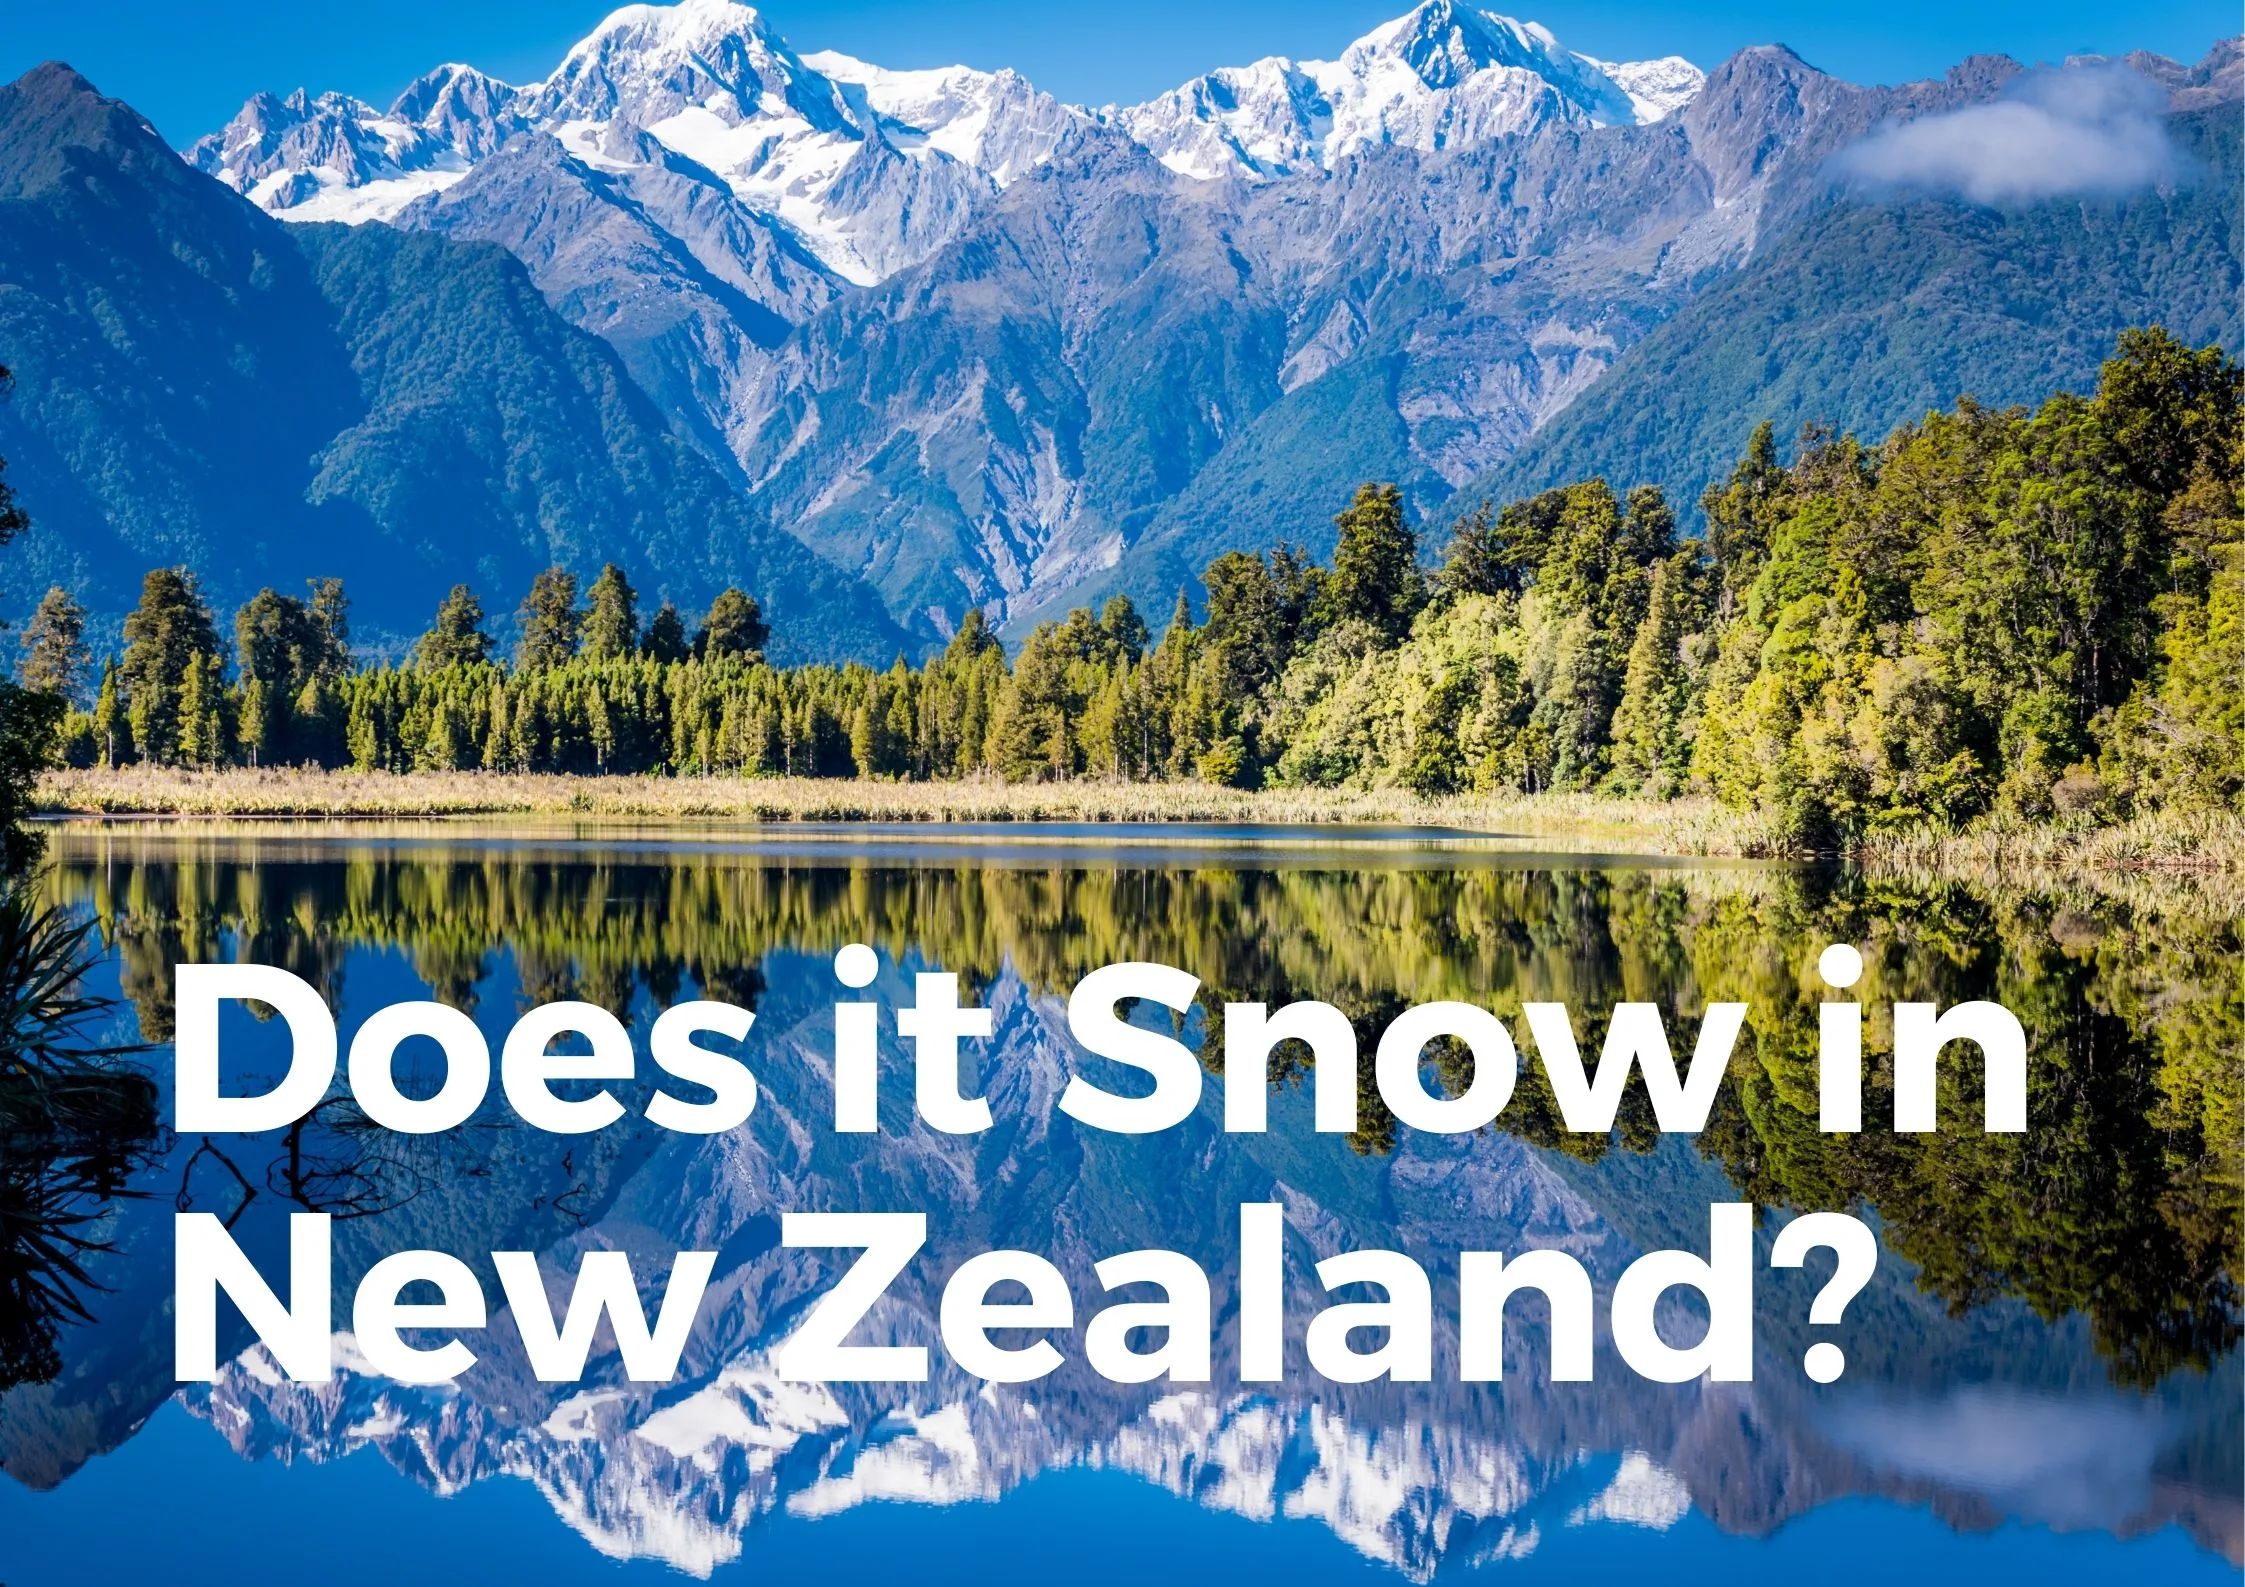 Does it Snow in New Zealand